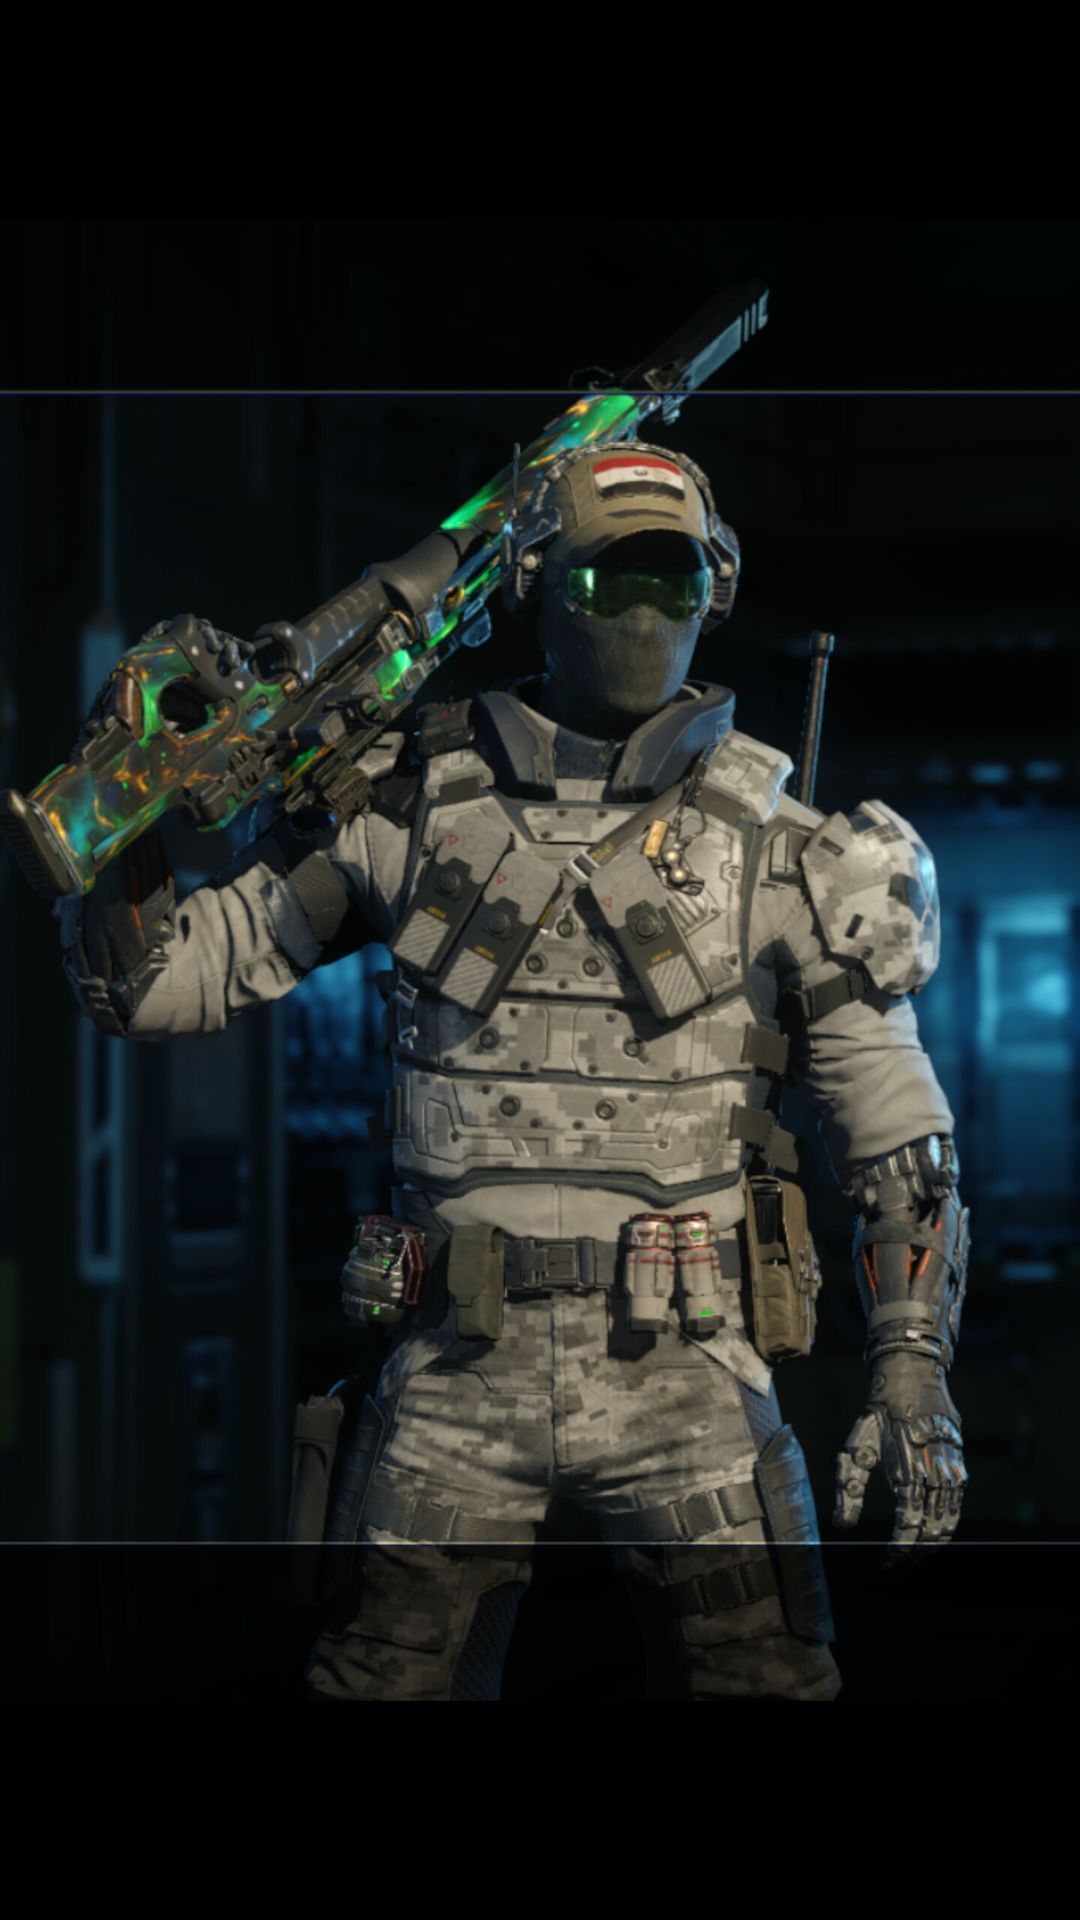 Cybernetic Soldier, Movin' out. Call of duty black ops Call of duty black, Call of duty